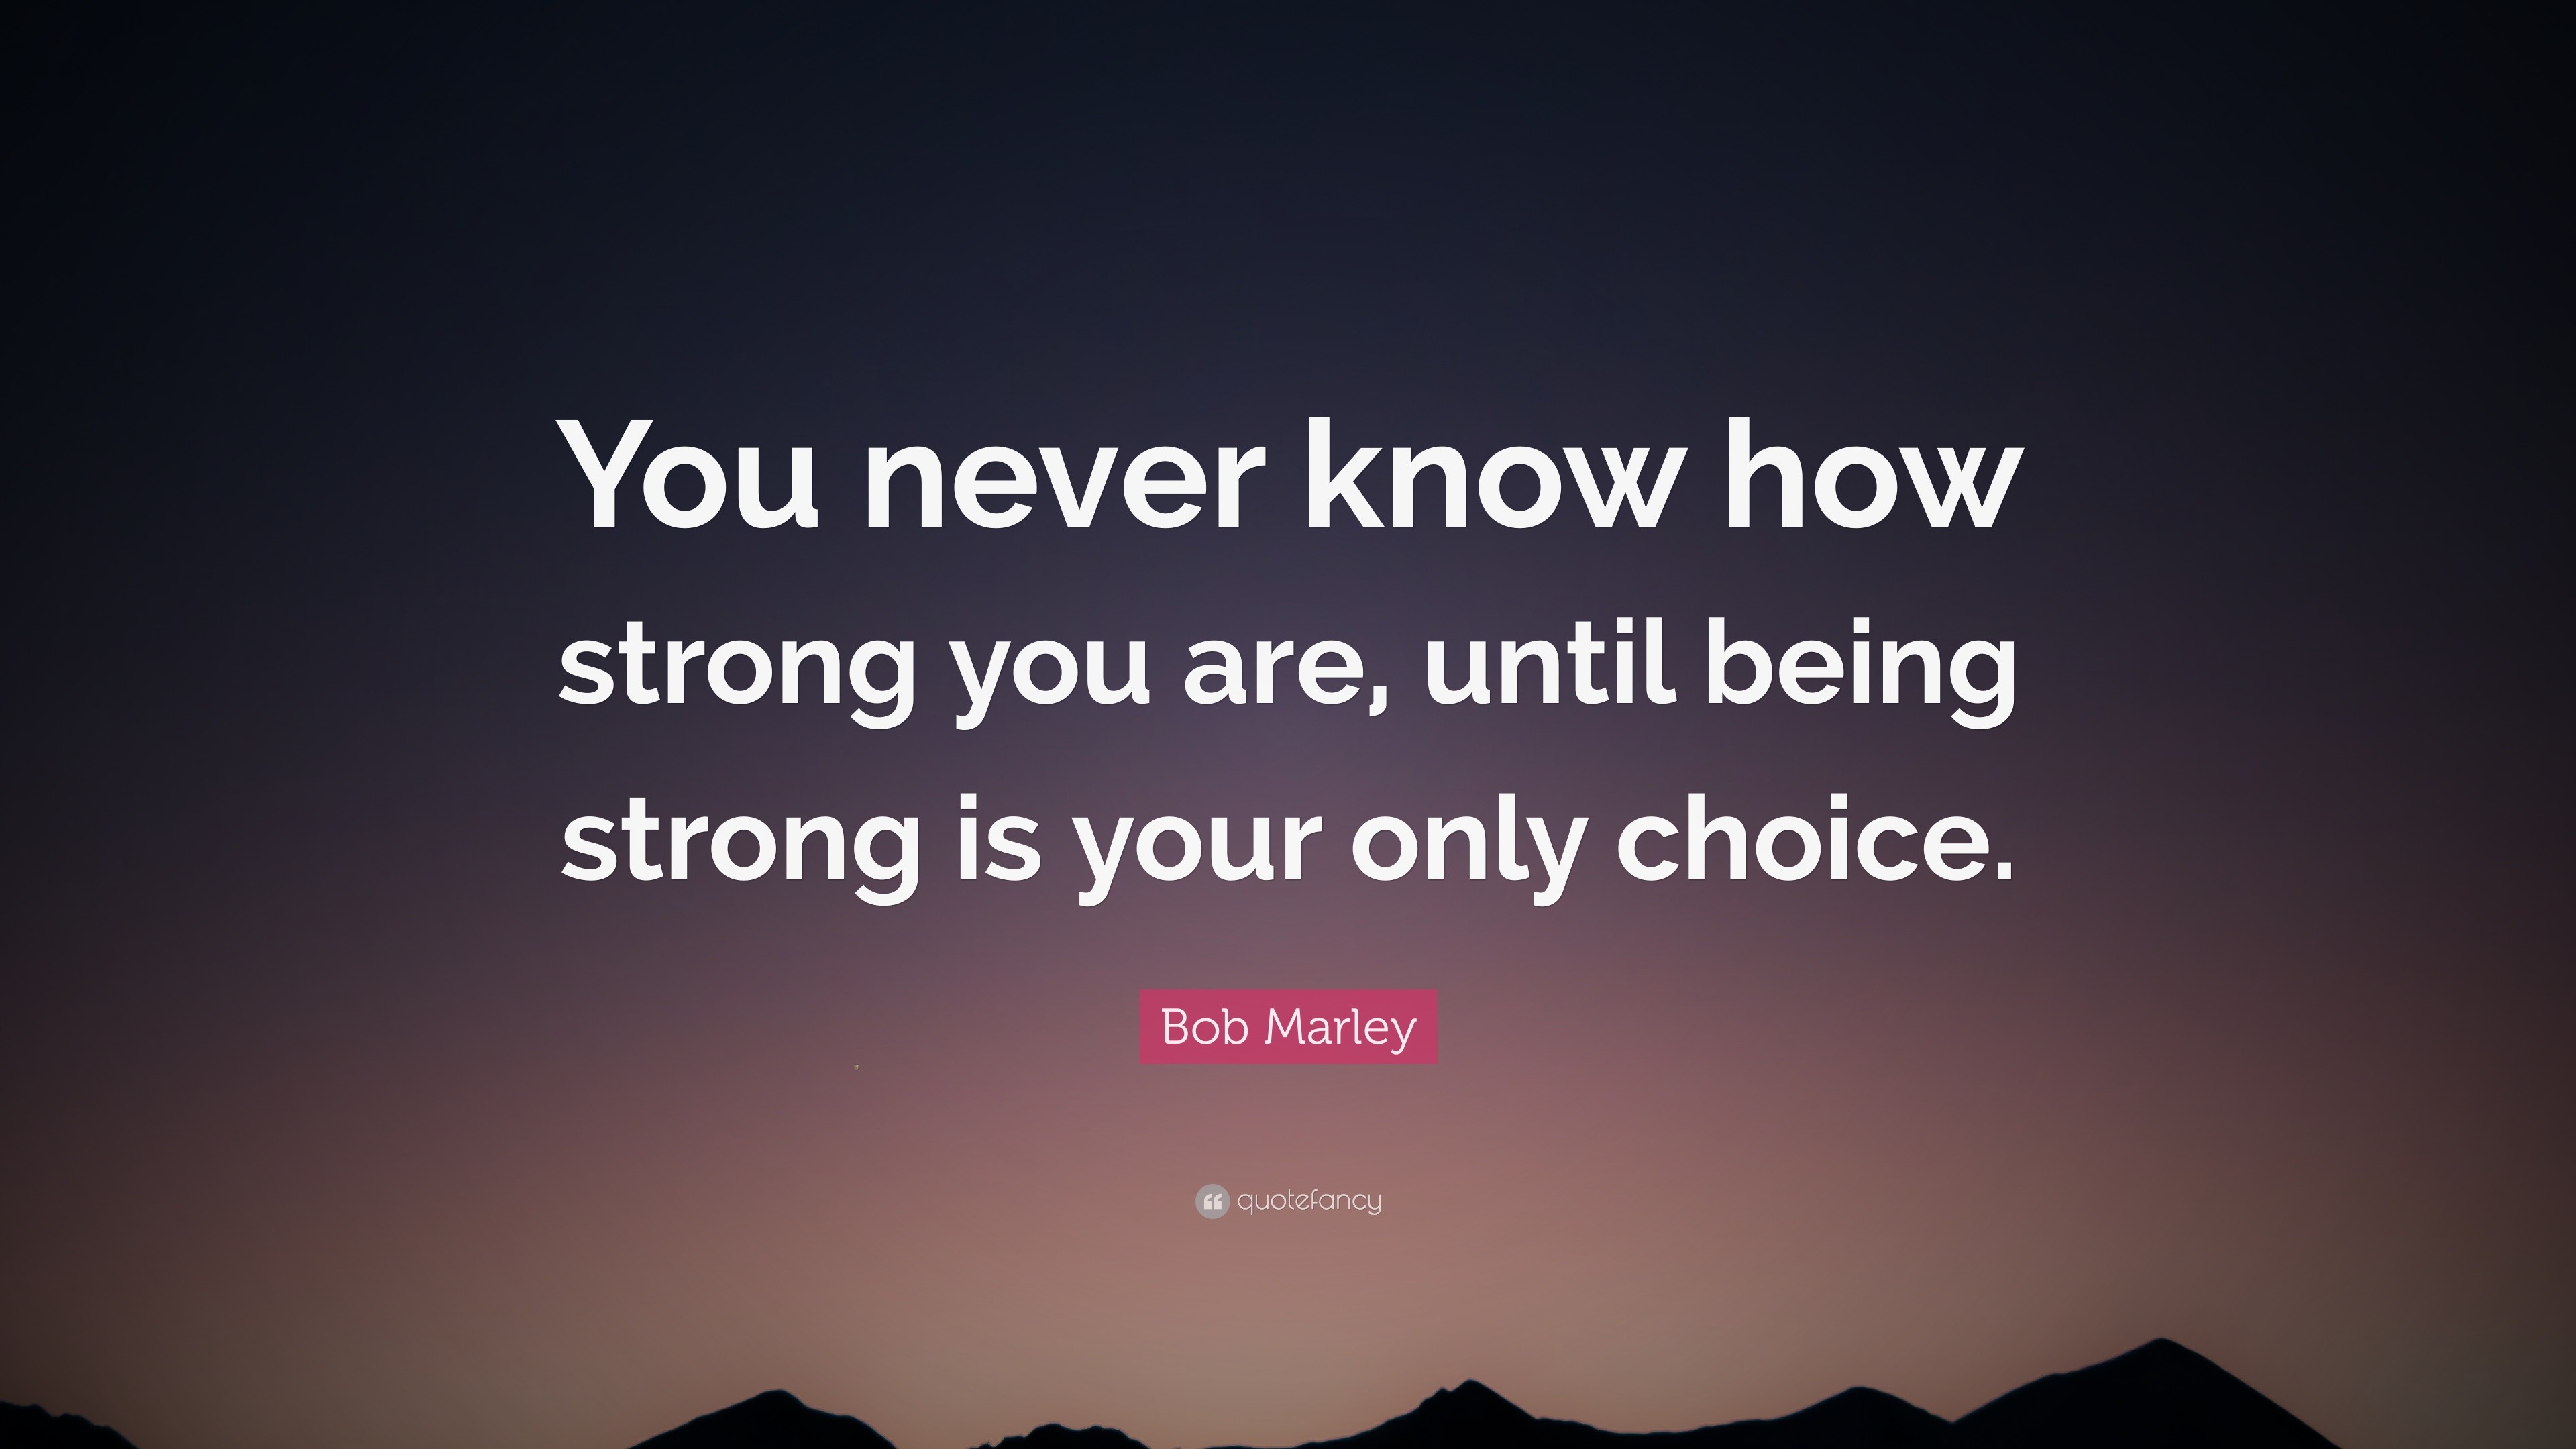 Bob Marley Quote “You never know how strong you are until being strong